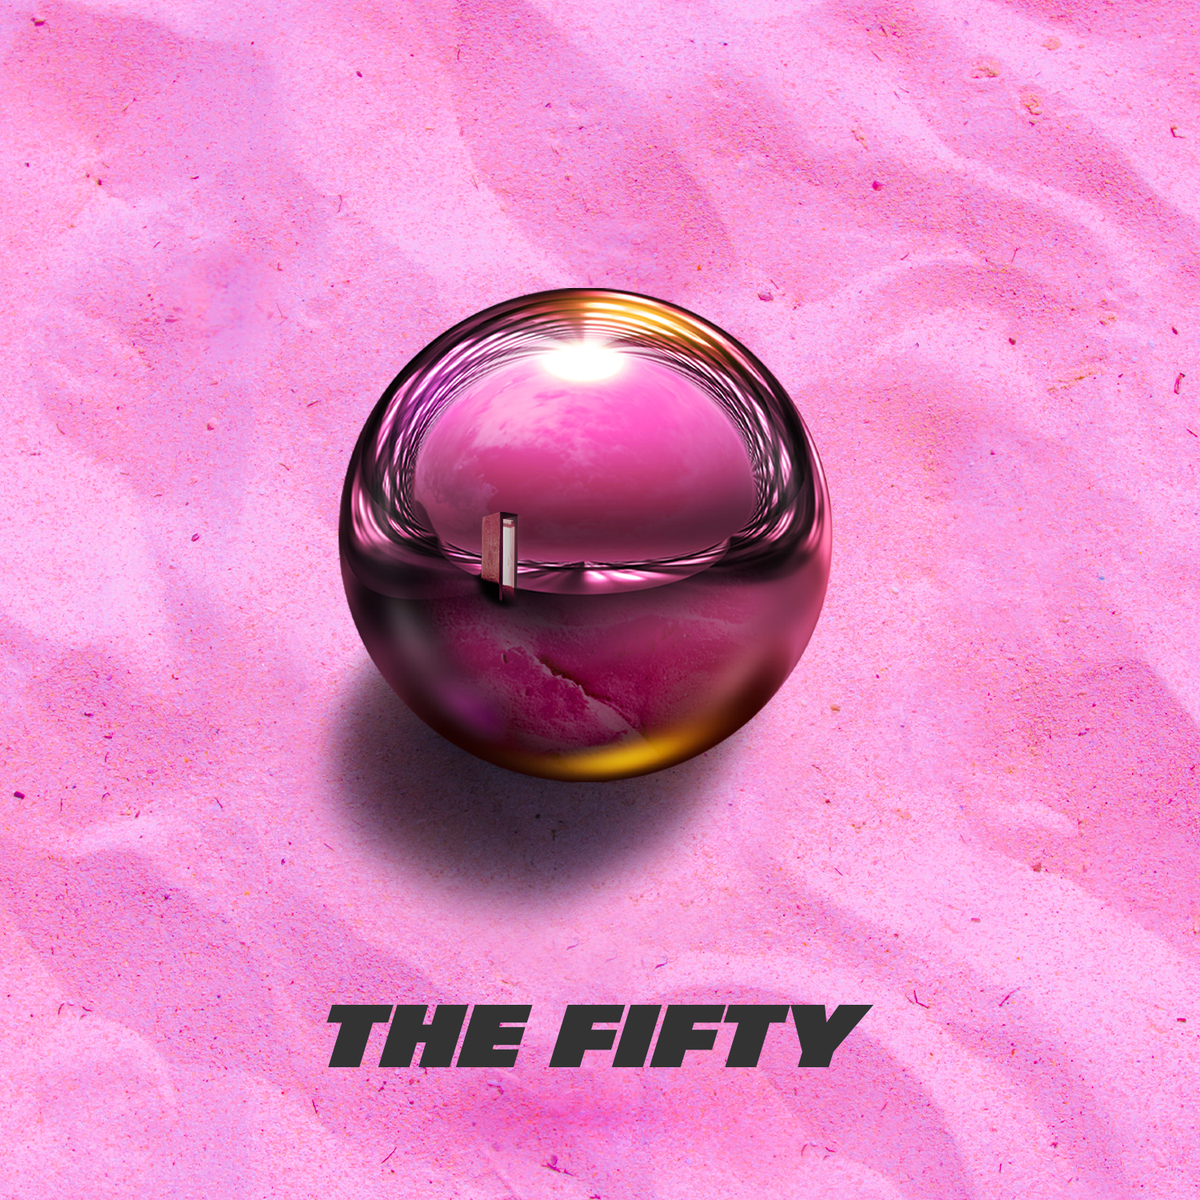 [Debut album] FIFTY FIFTY - The 1st EP [THE FIFTY]